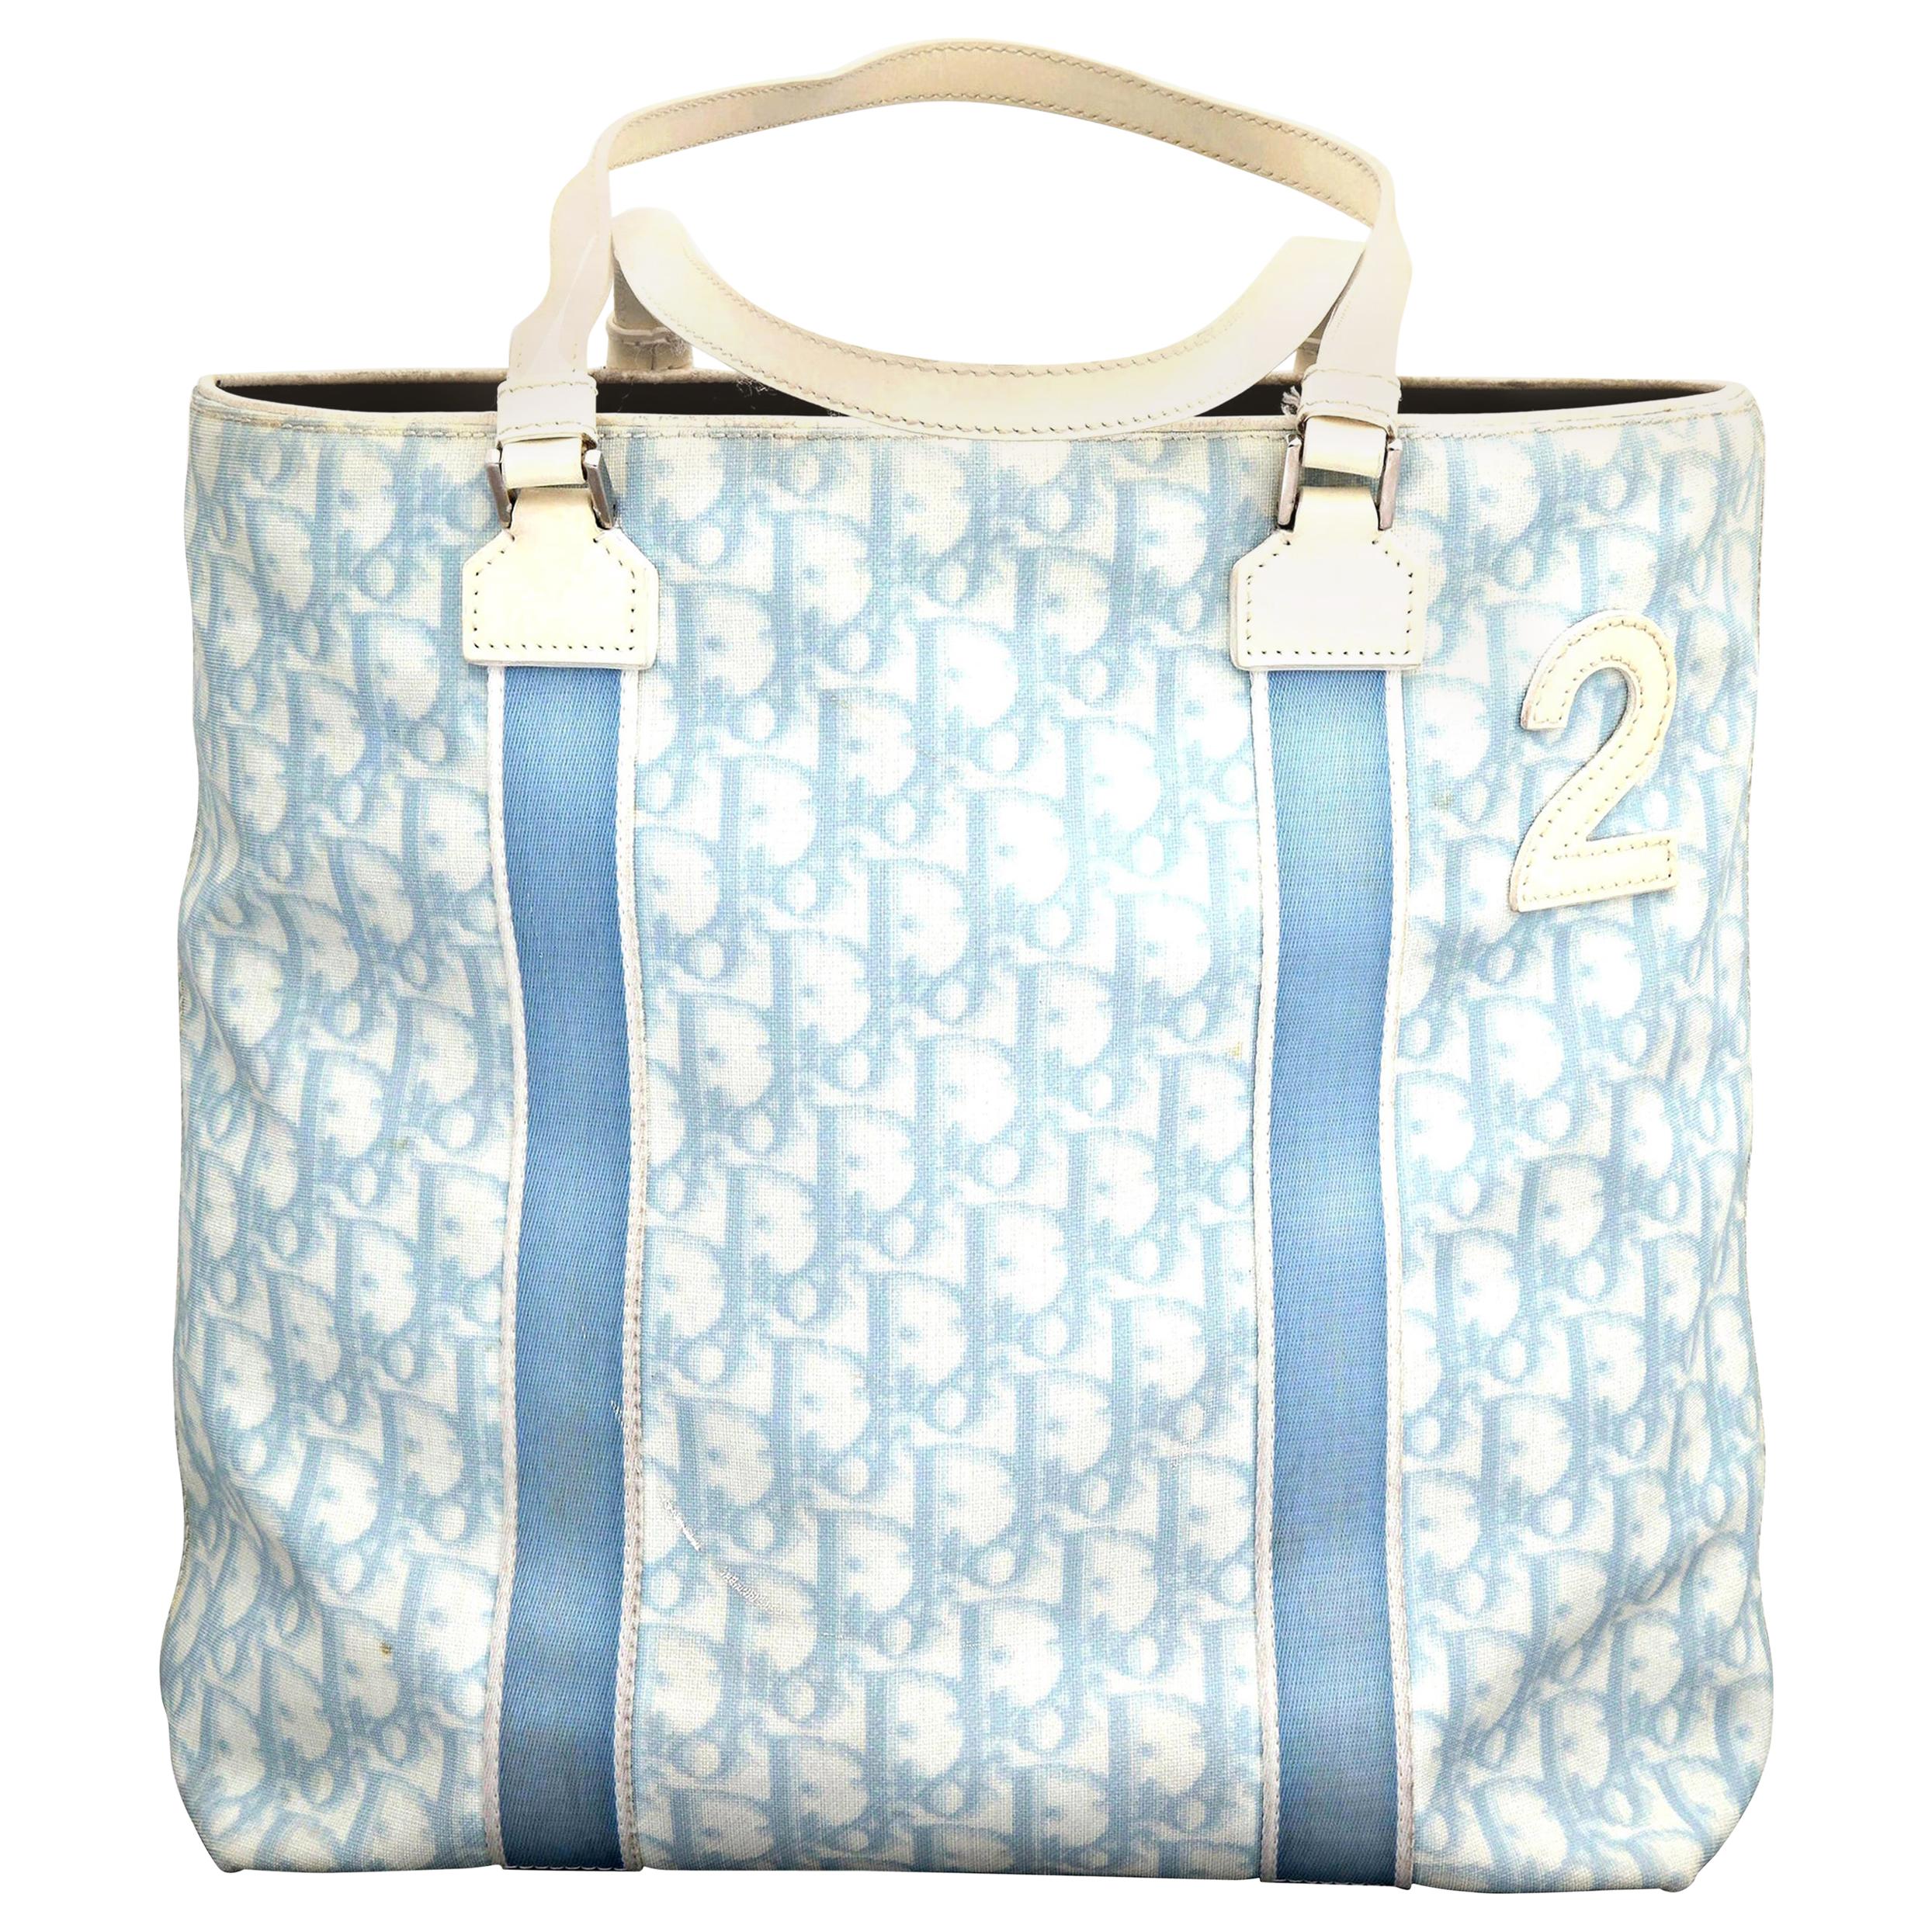 John Galliano for Christian Dior Light Blue Logo Tote Bag with "2" For Sale